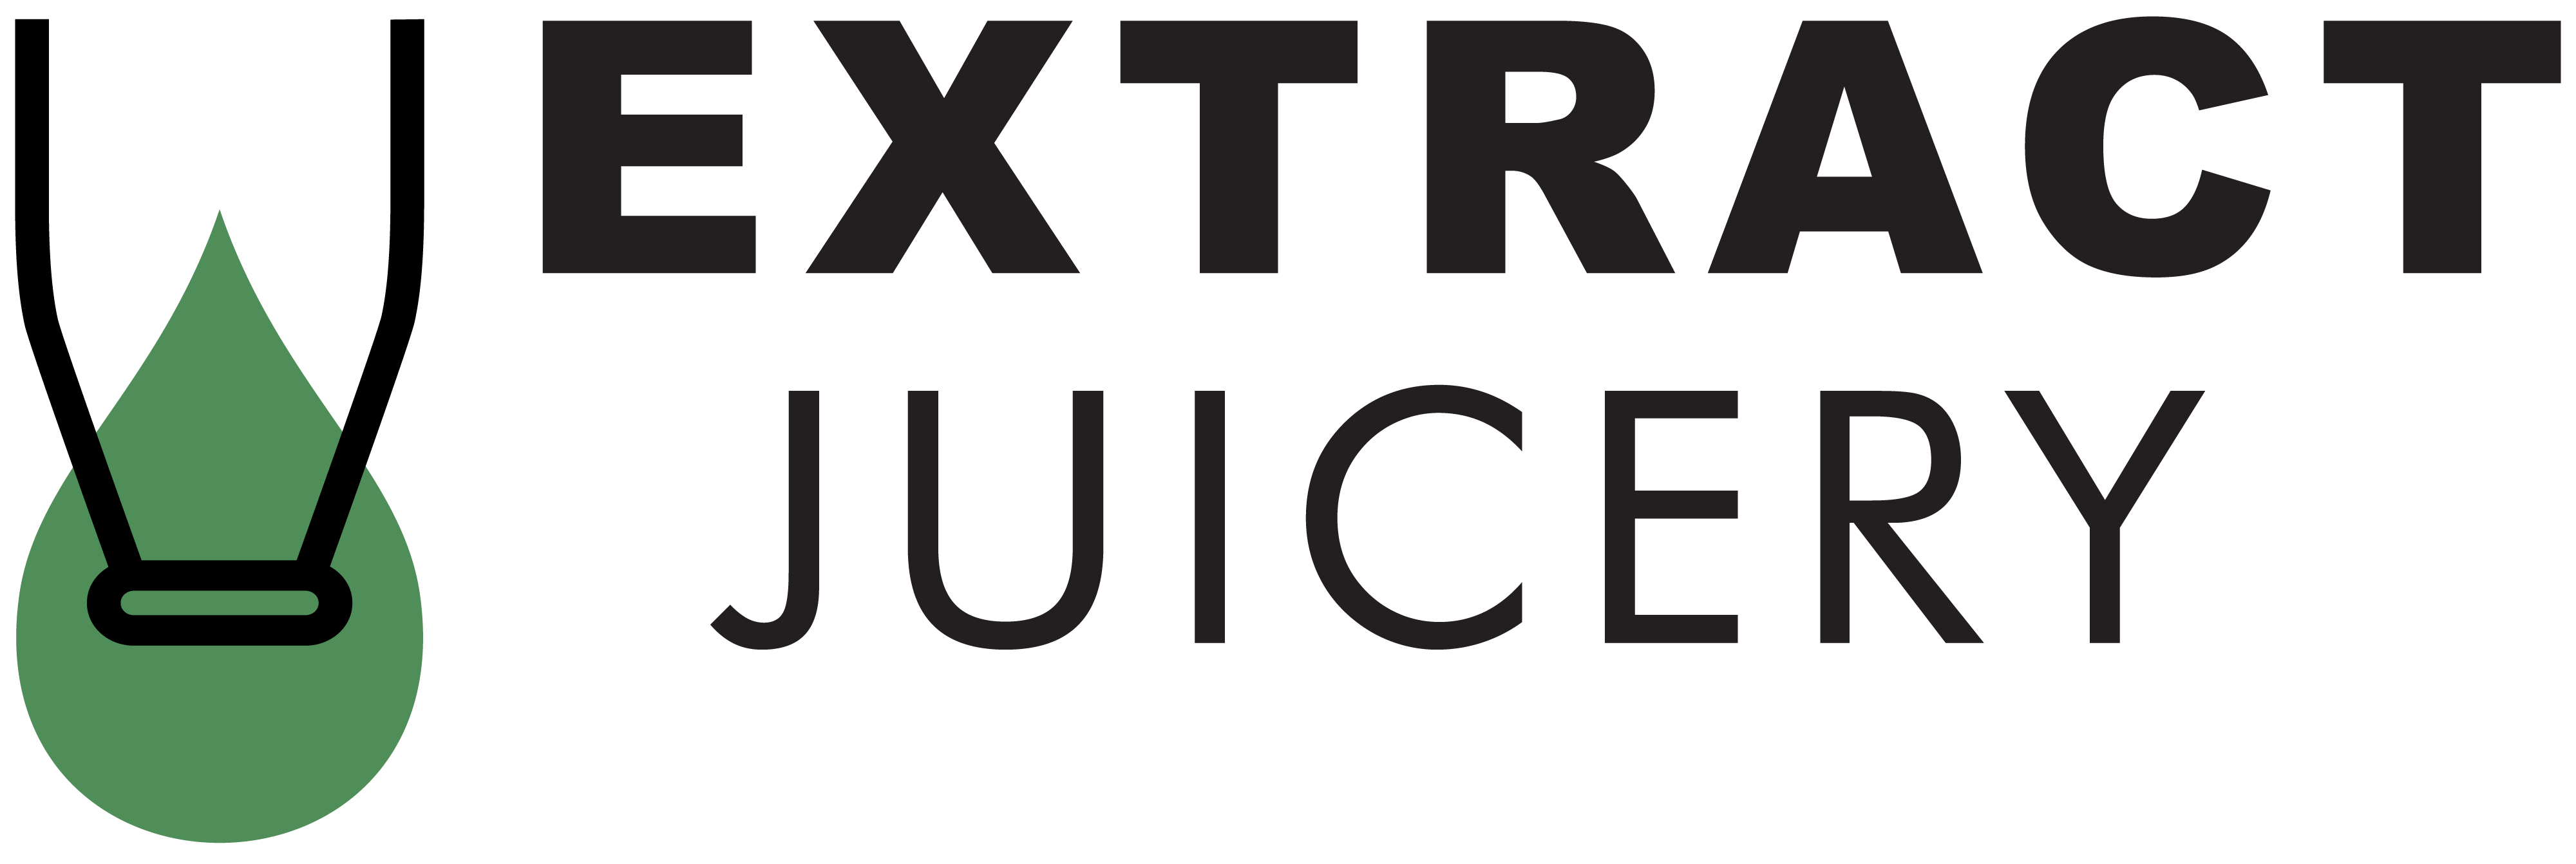 Extract Juicery - Organic Cold-Pressed Juice Bar in Wheaton, IL